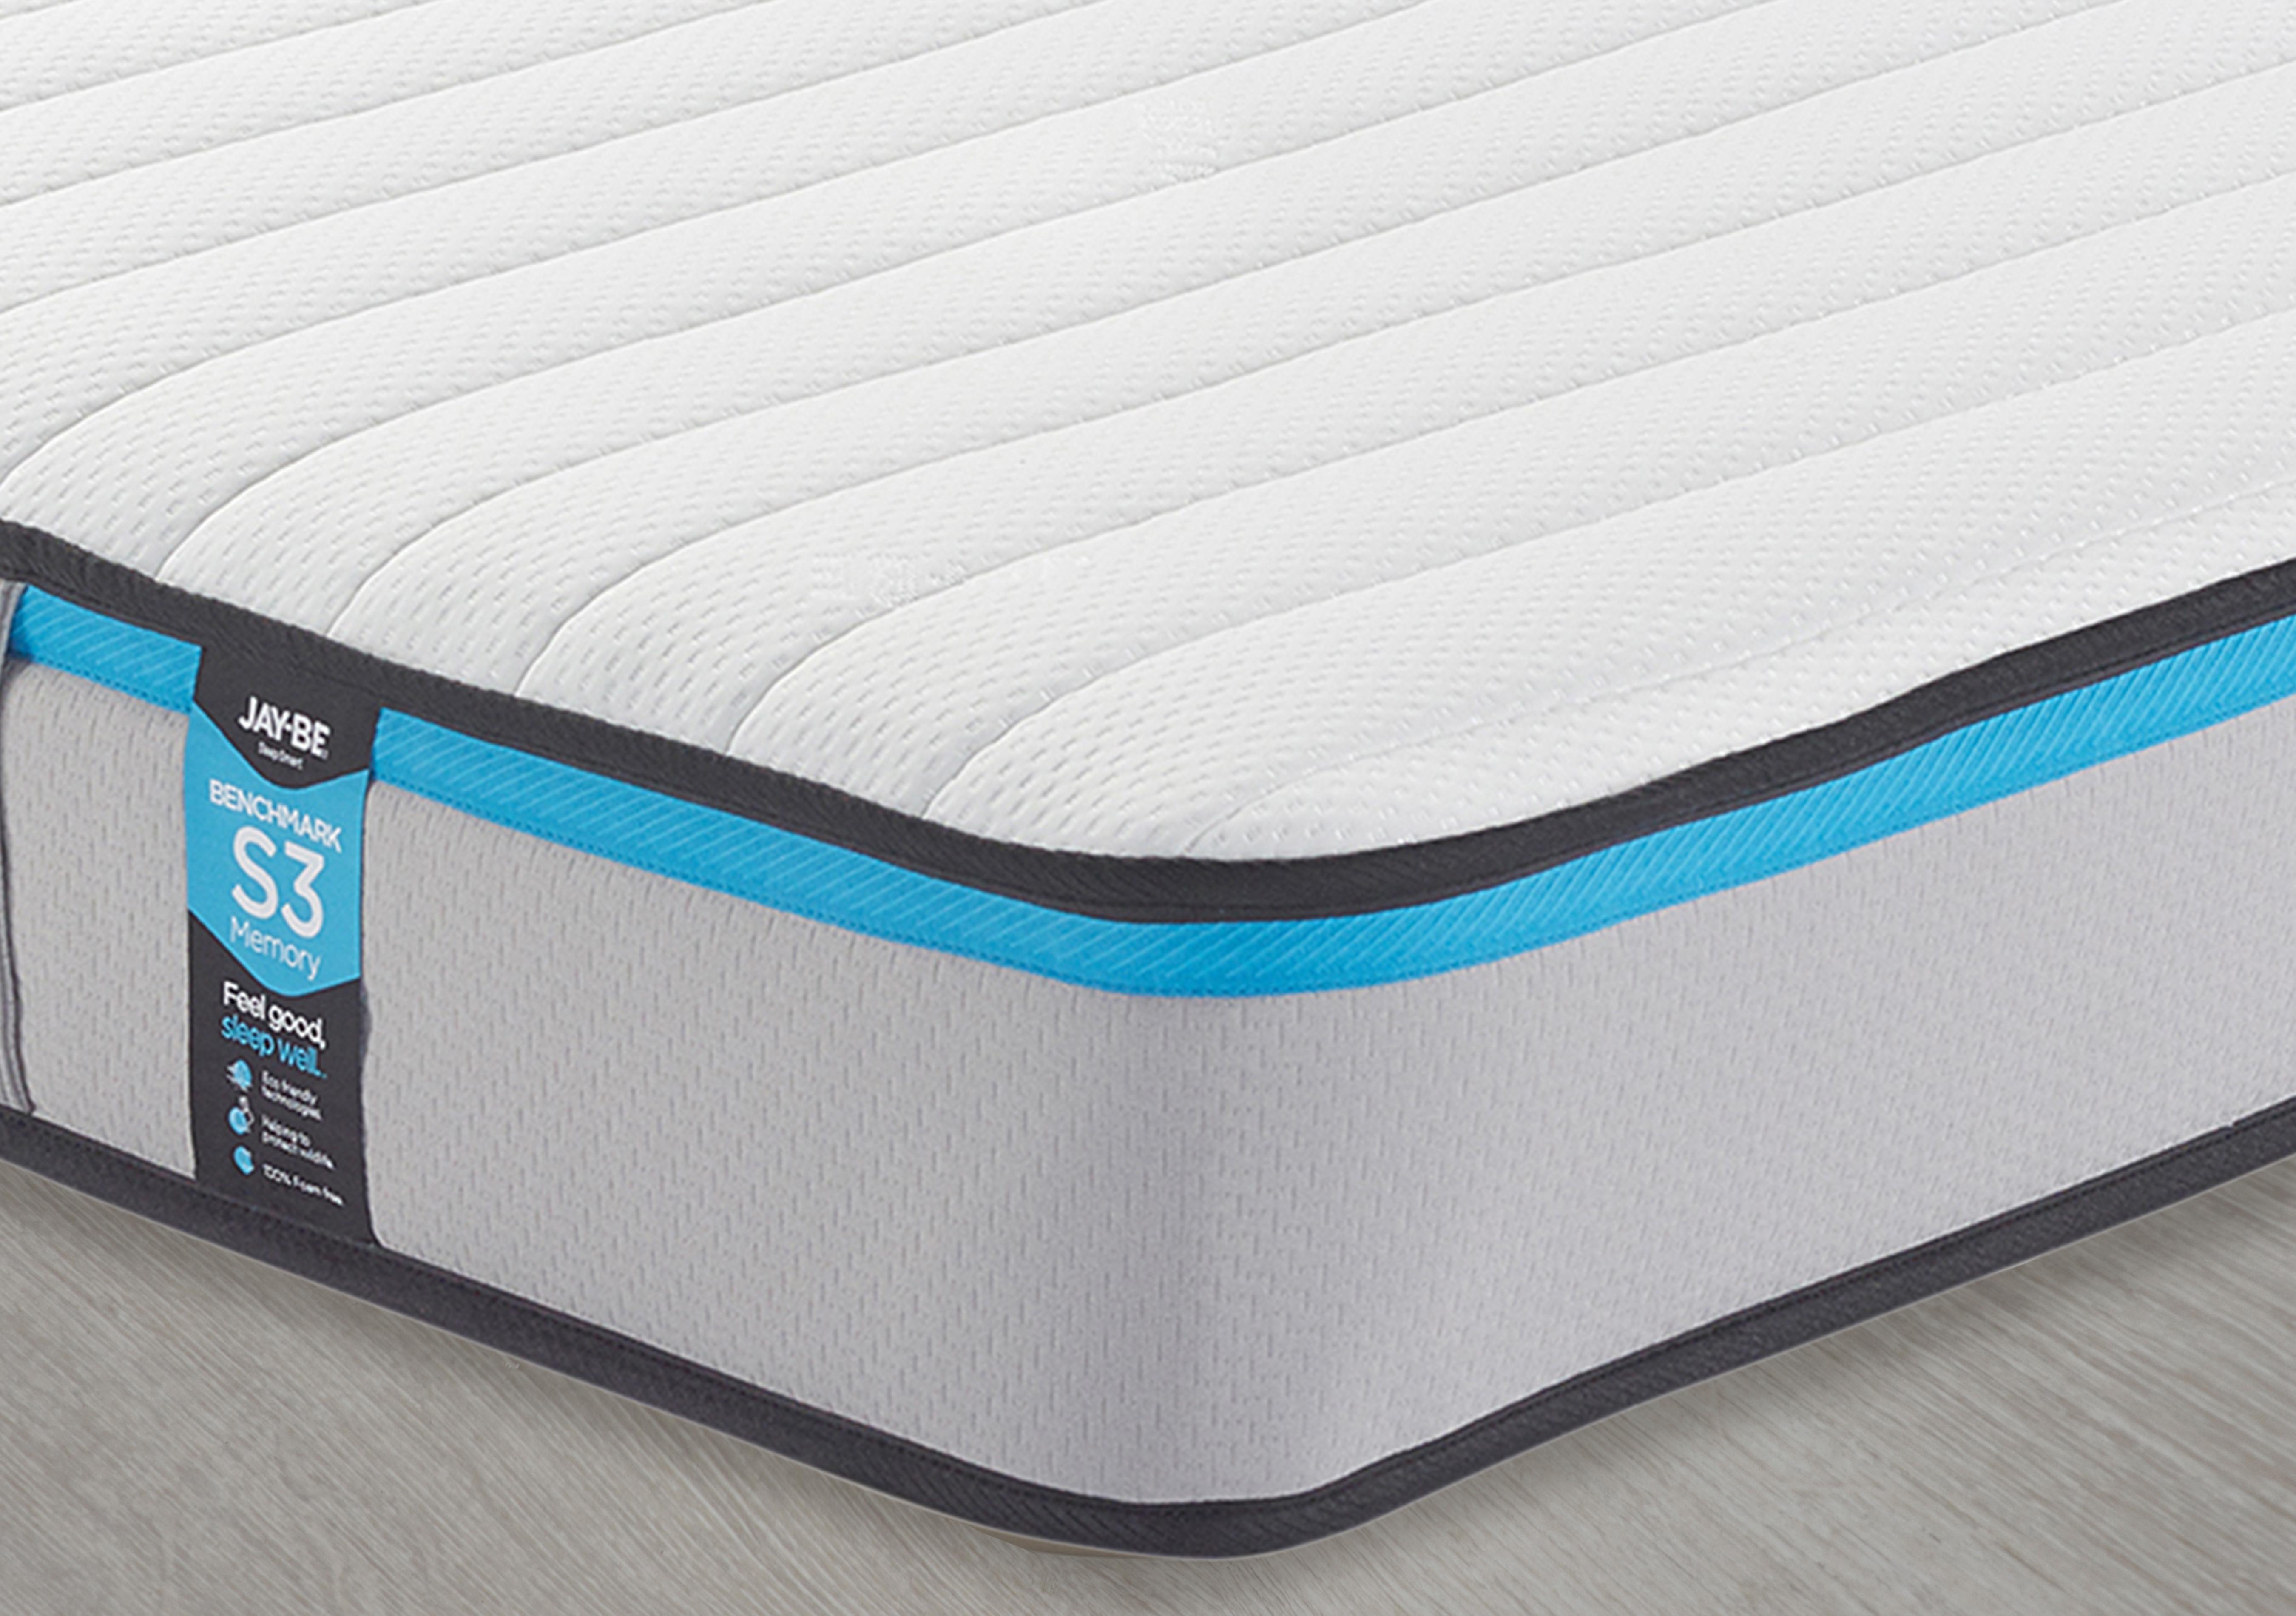 Benchmark S3 Memory Eco-friendly Mattress in  on Furniture Village